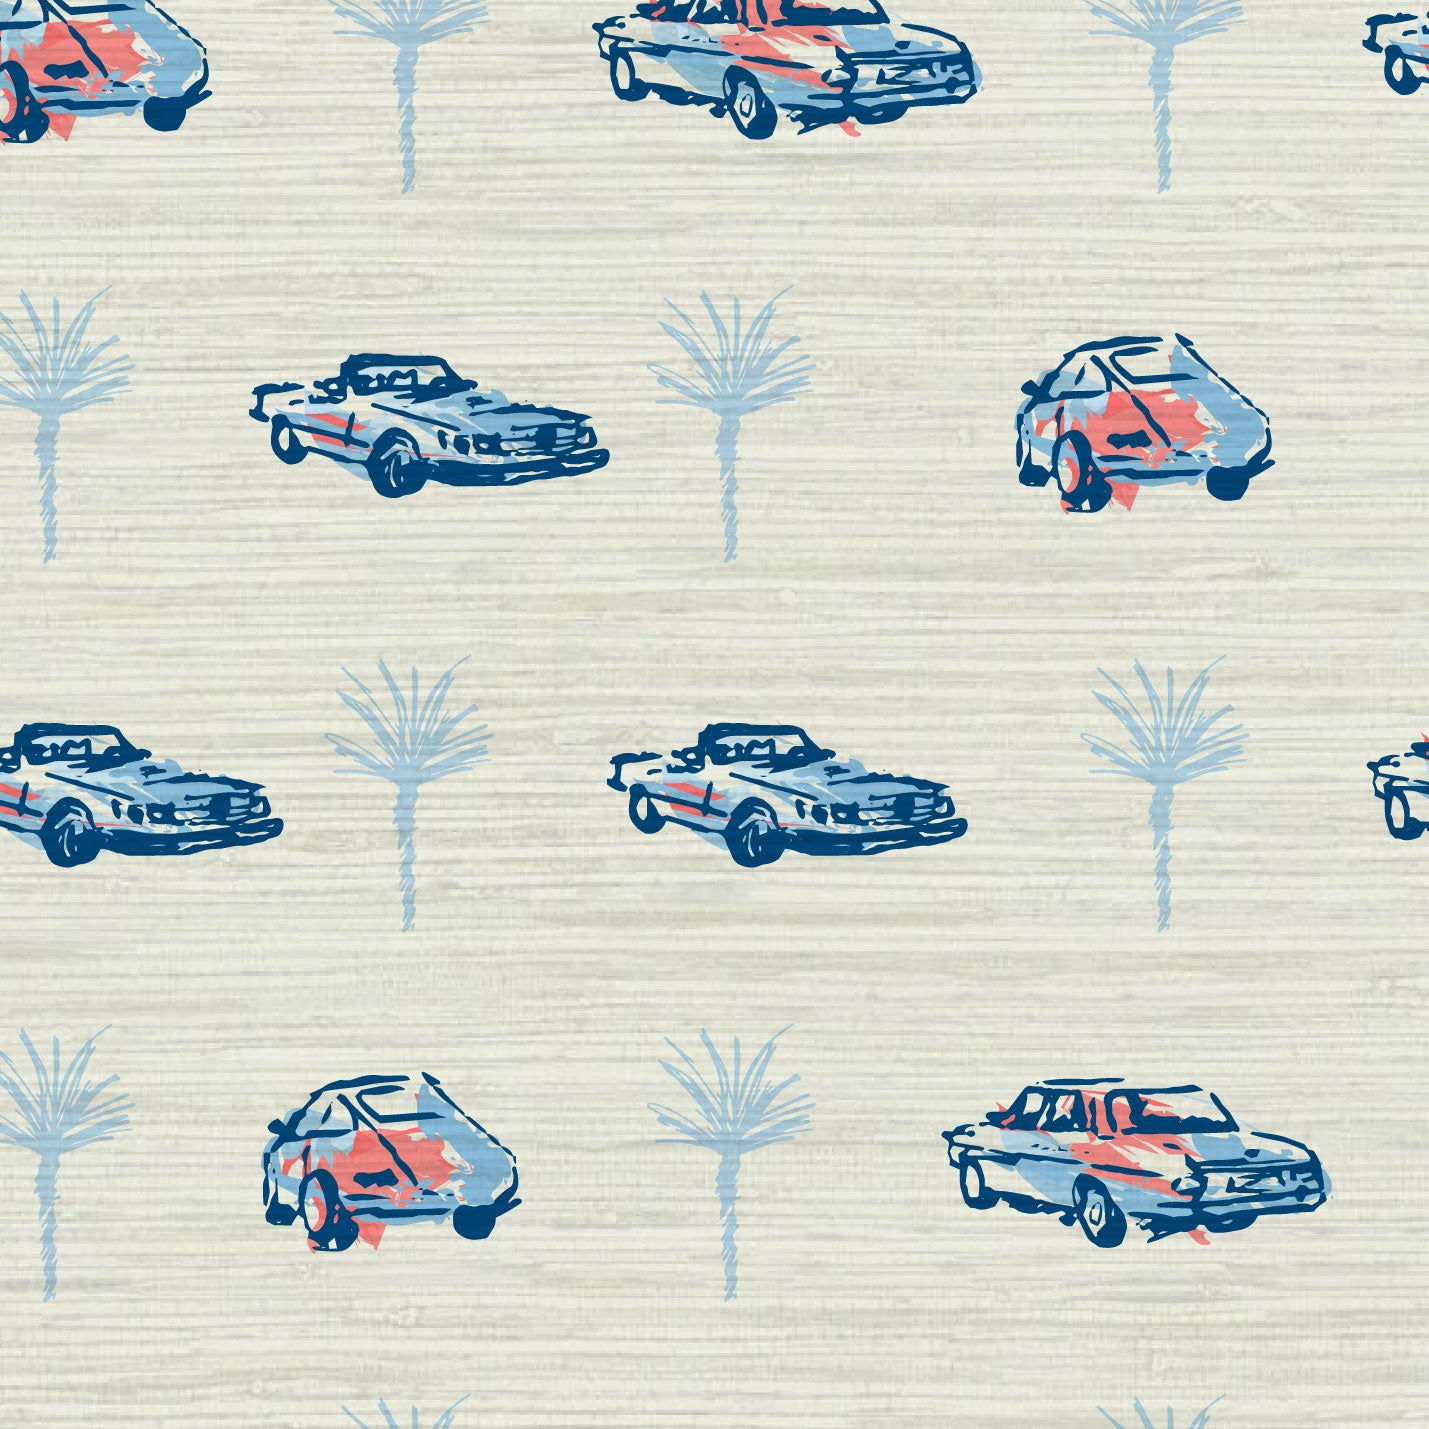 Grasscloth wallpaper Natural Textured Eco-Friendly Non-toxic High-quality Sustainable Interior Design Bold Custom Tailor-made Retro chic Grand millennial Maximalism Traditional Dopamine decor tropical palm tree mercedes bmw porsche mini icon vertical grid stripe kid playroom white royal navy blue tomato red orange